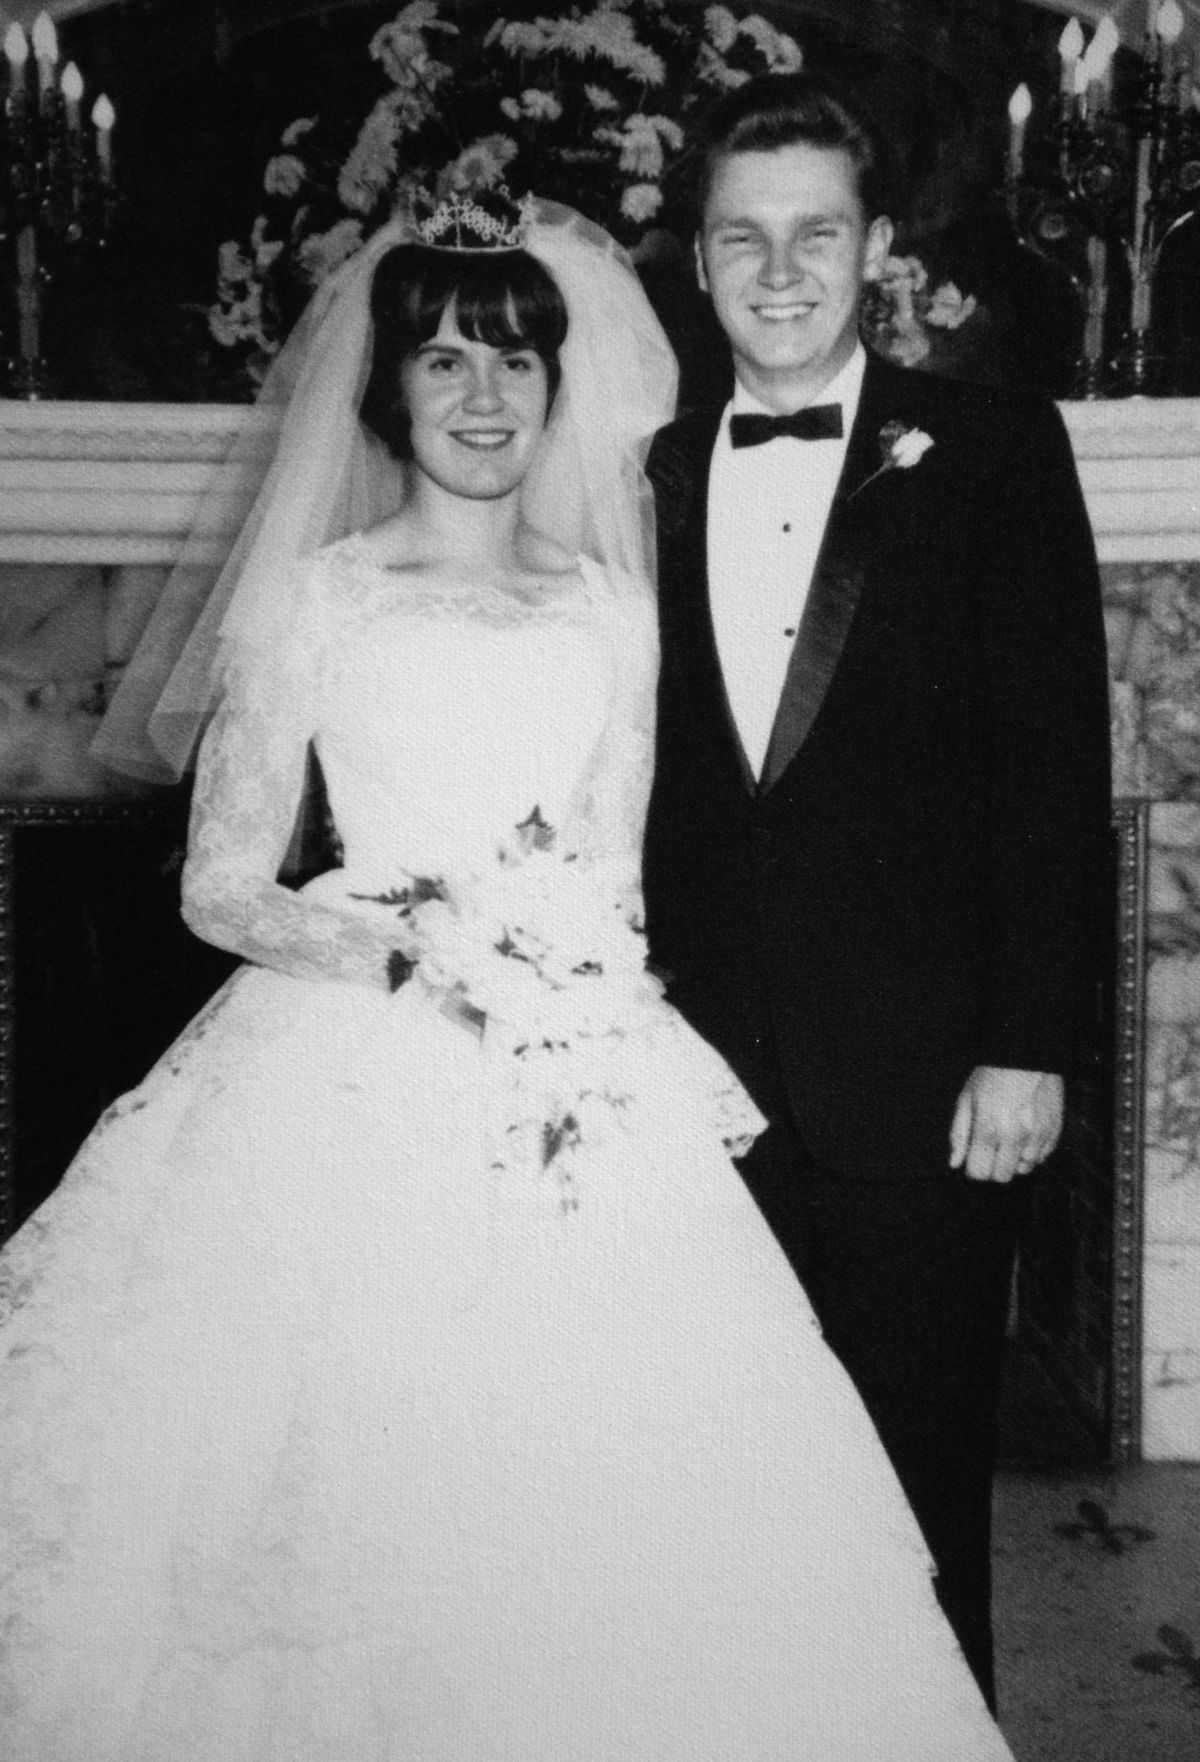 Randy and Sally Olson, shown in their wedding photo in 1965, have been married 50 years. (Jesse Tinsley / The Spokesman-Review)